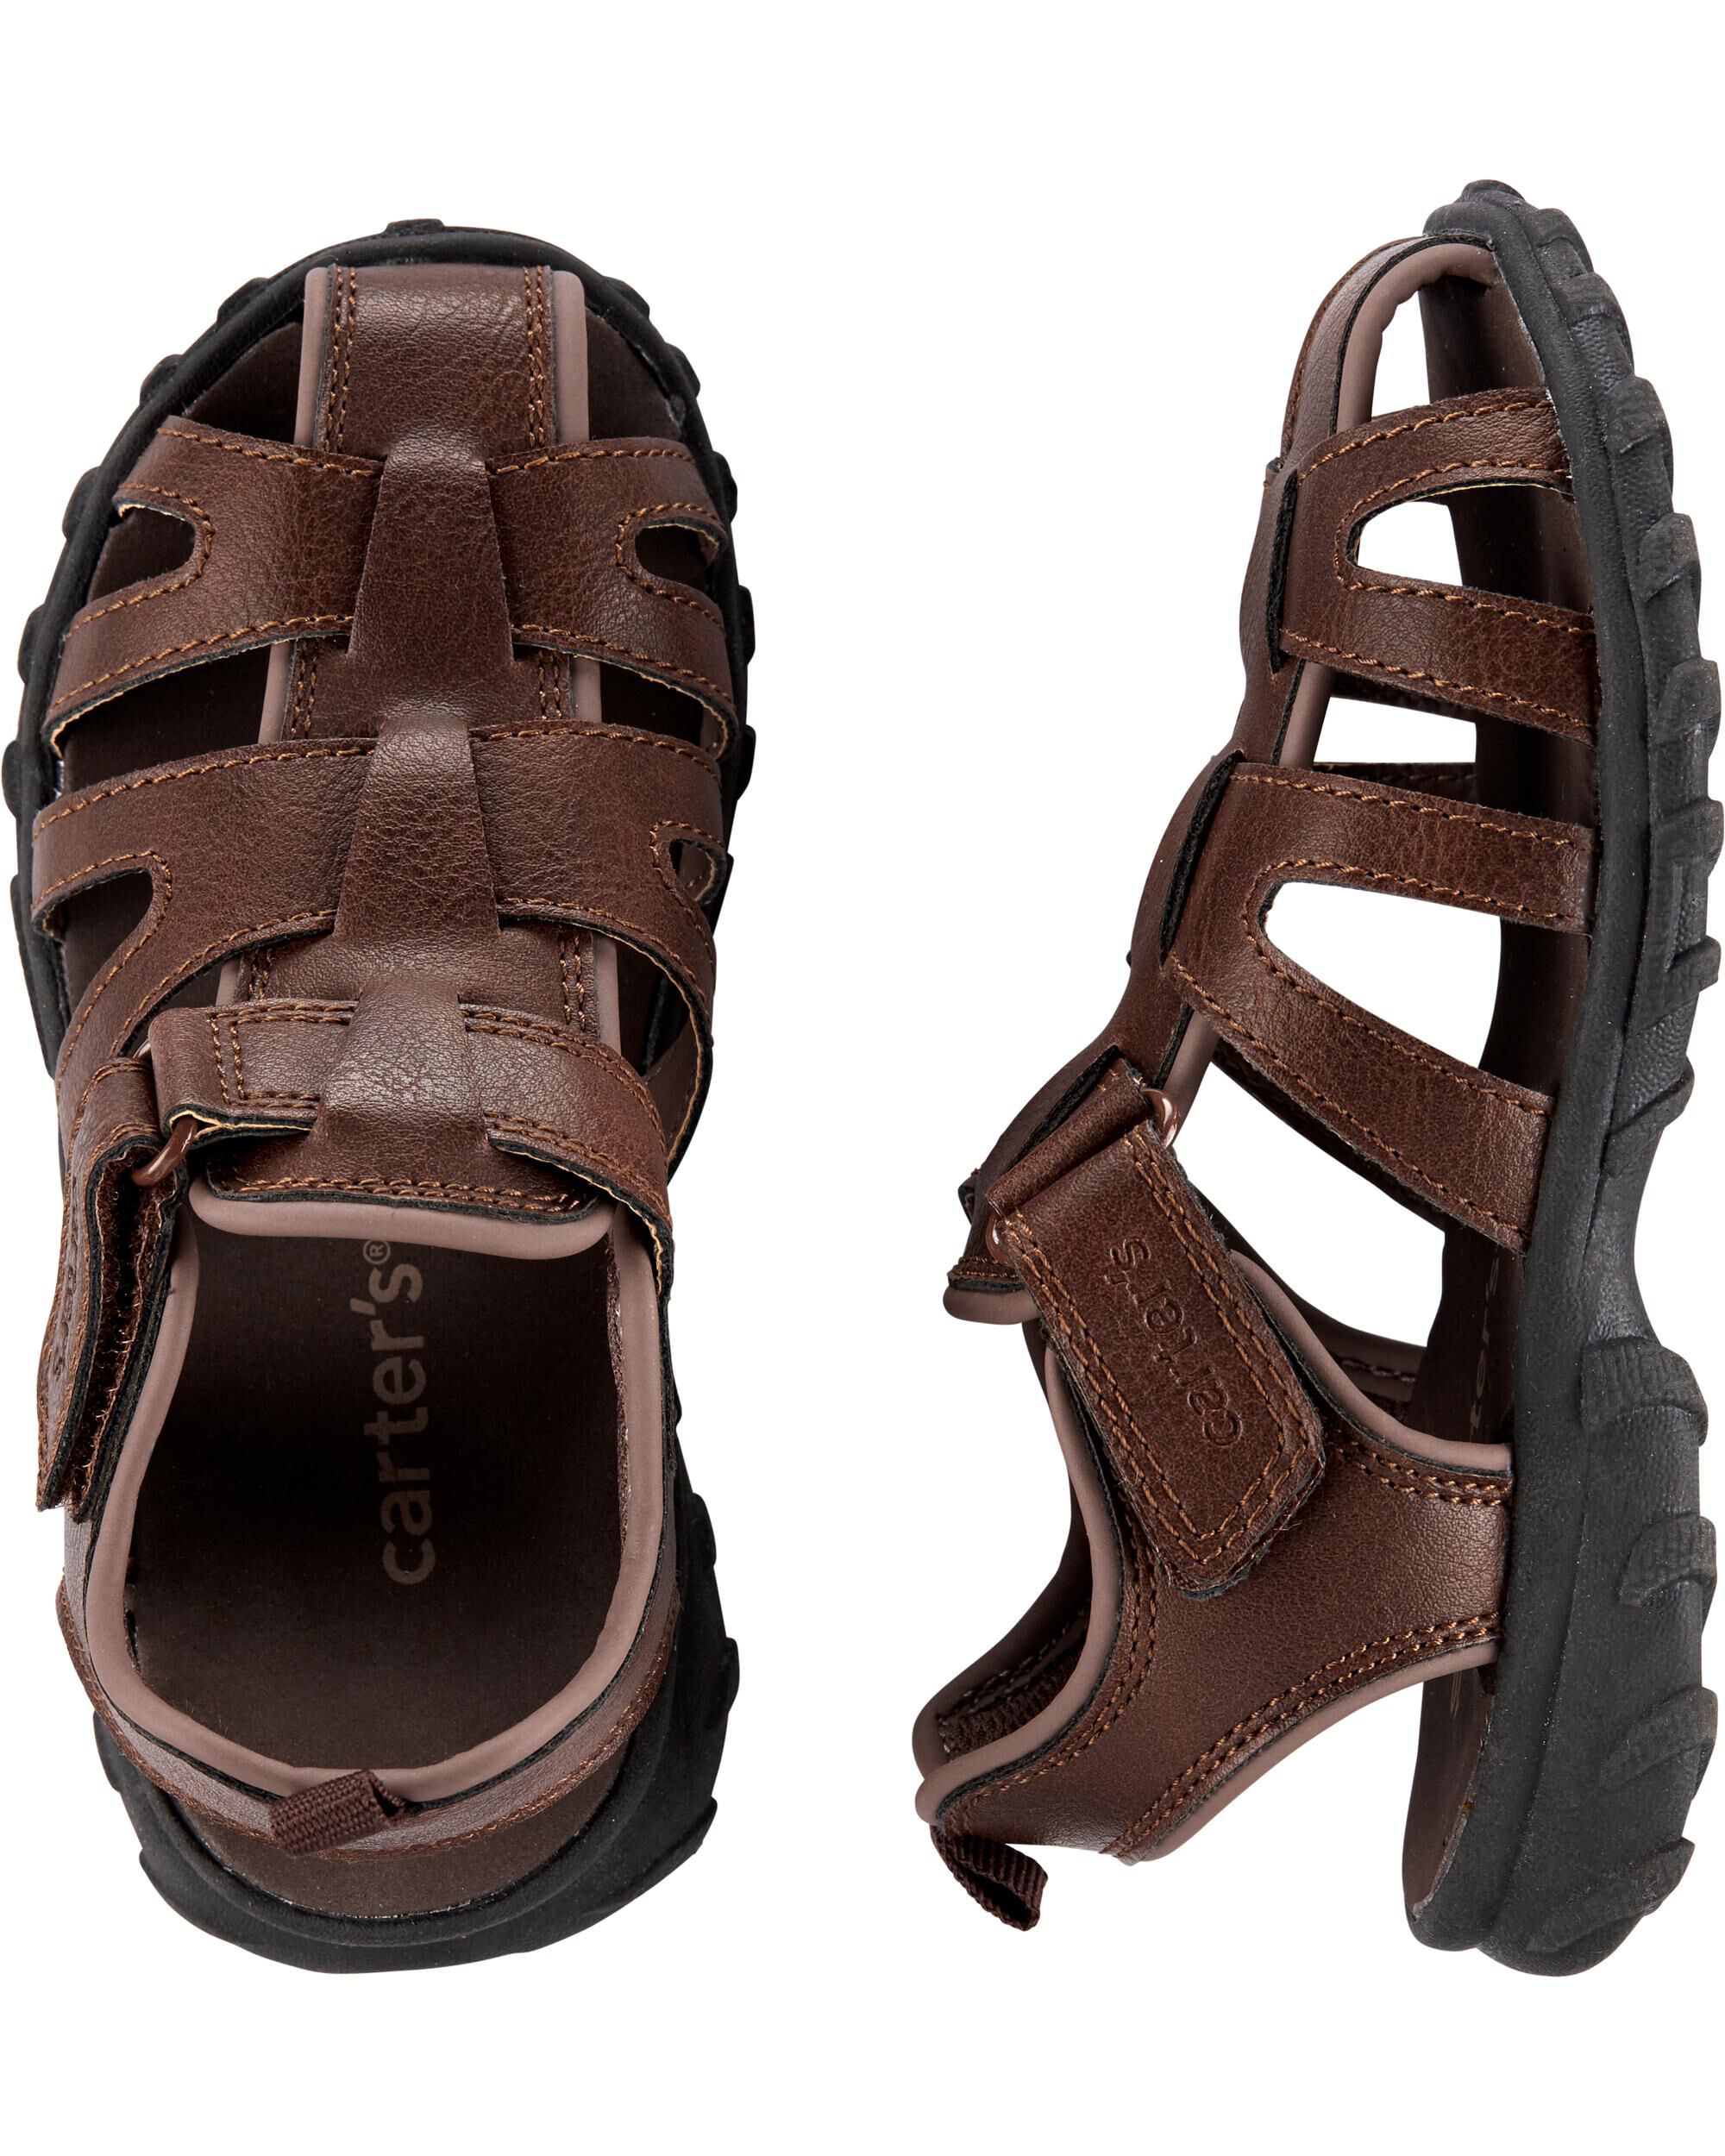 huaraches carters online -